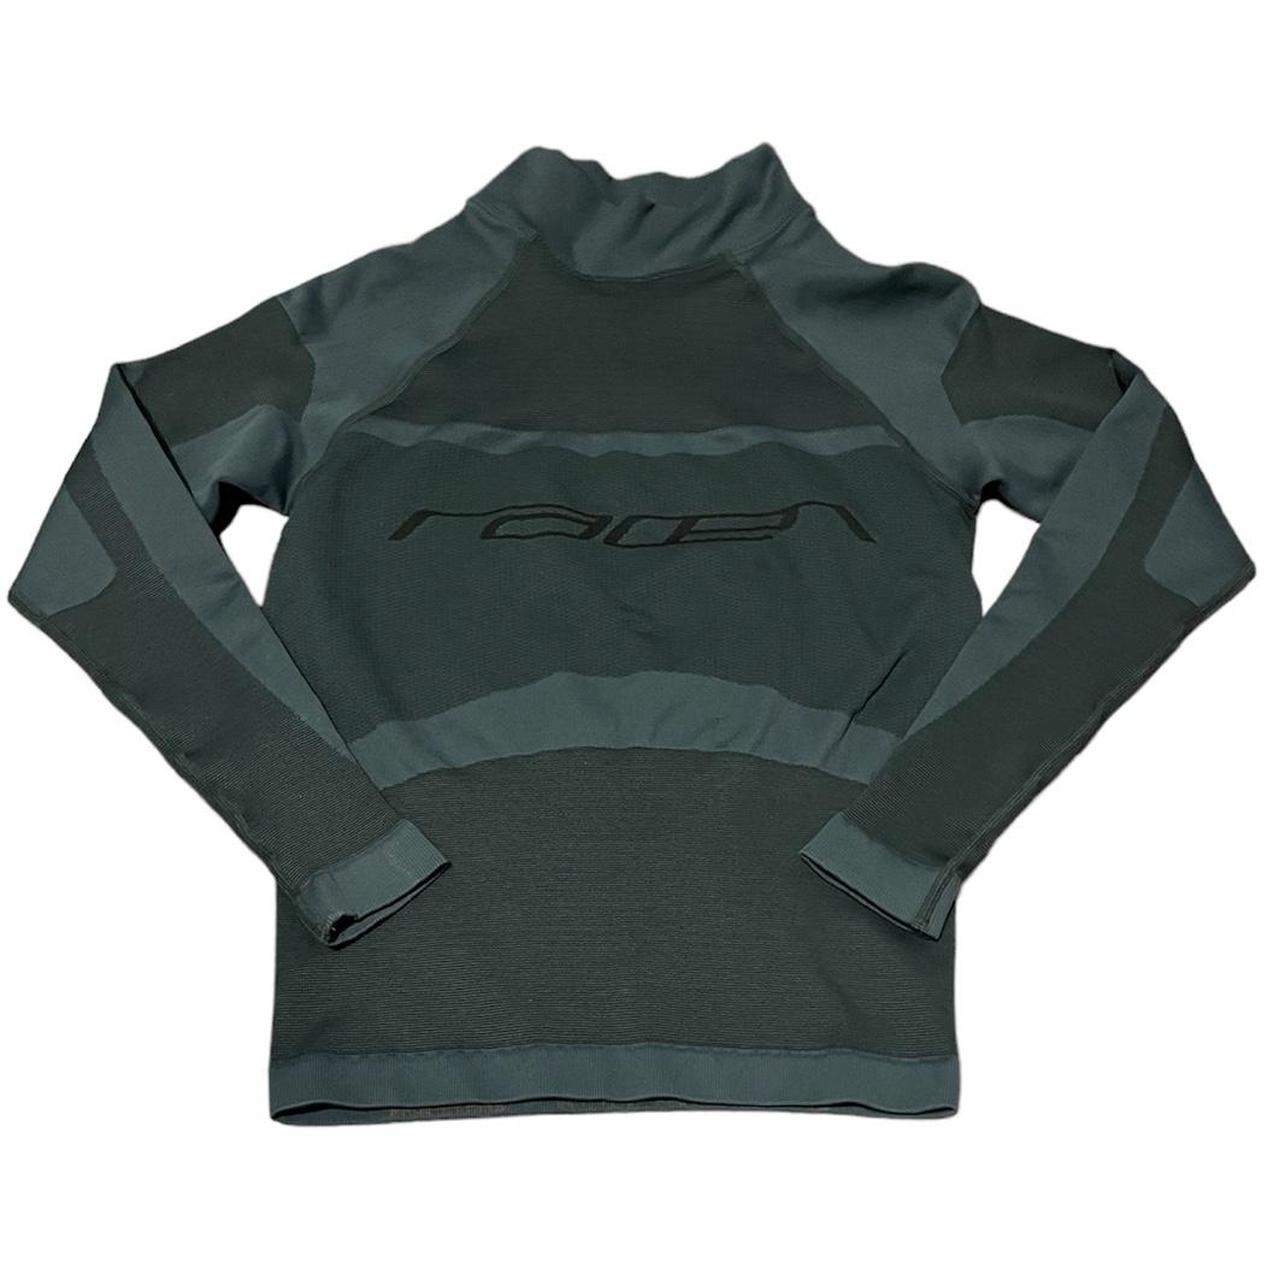 Racer Worldwide performance top, long sleeve fitted